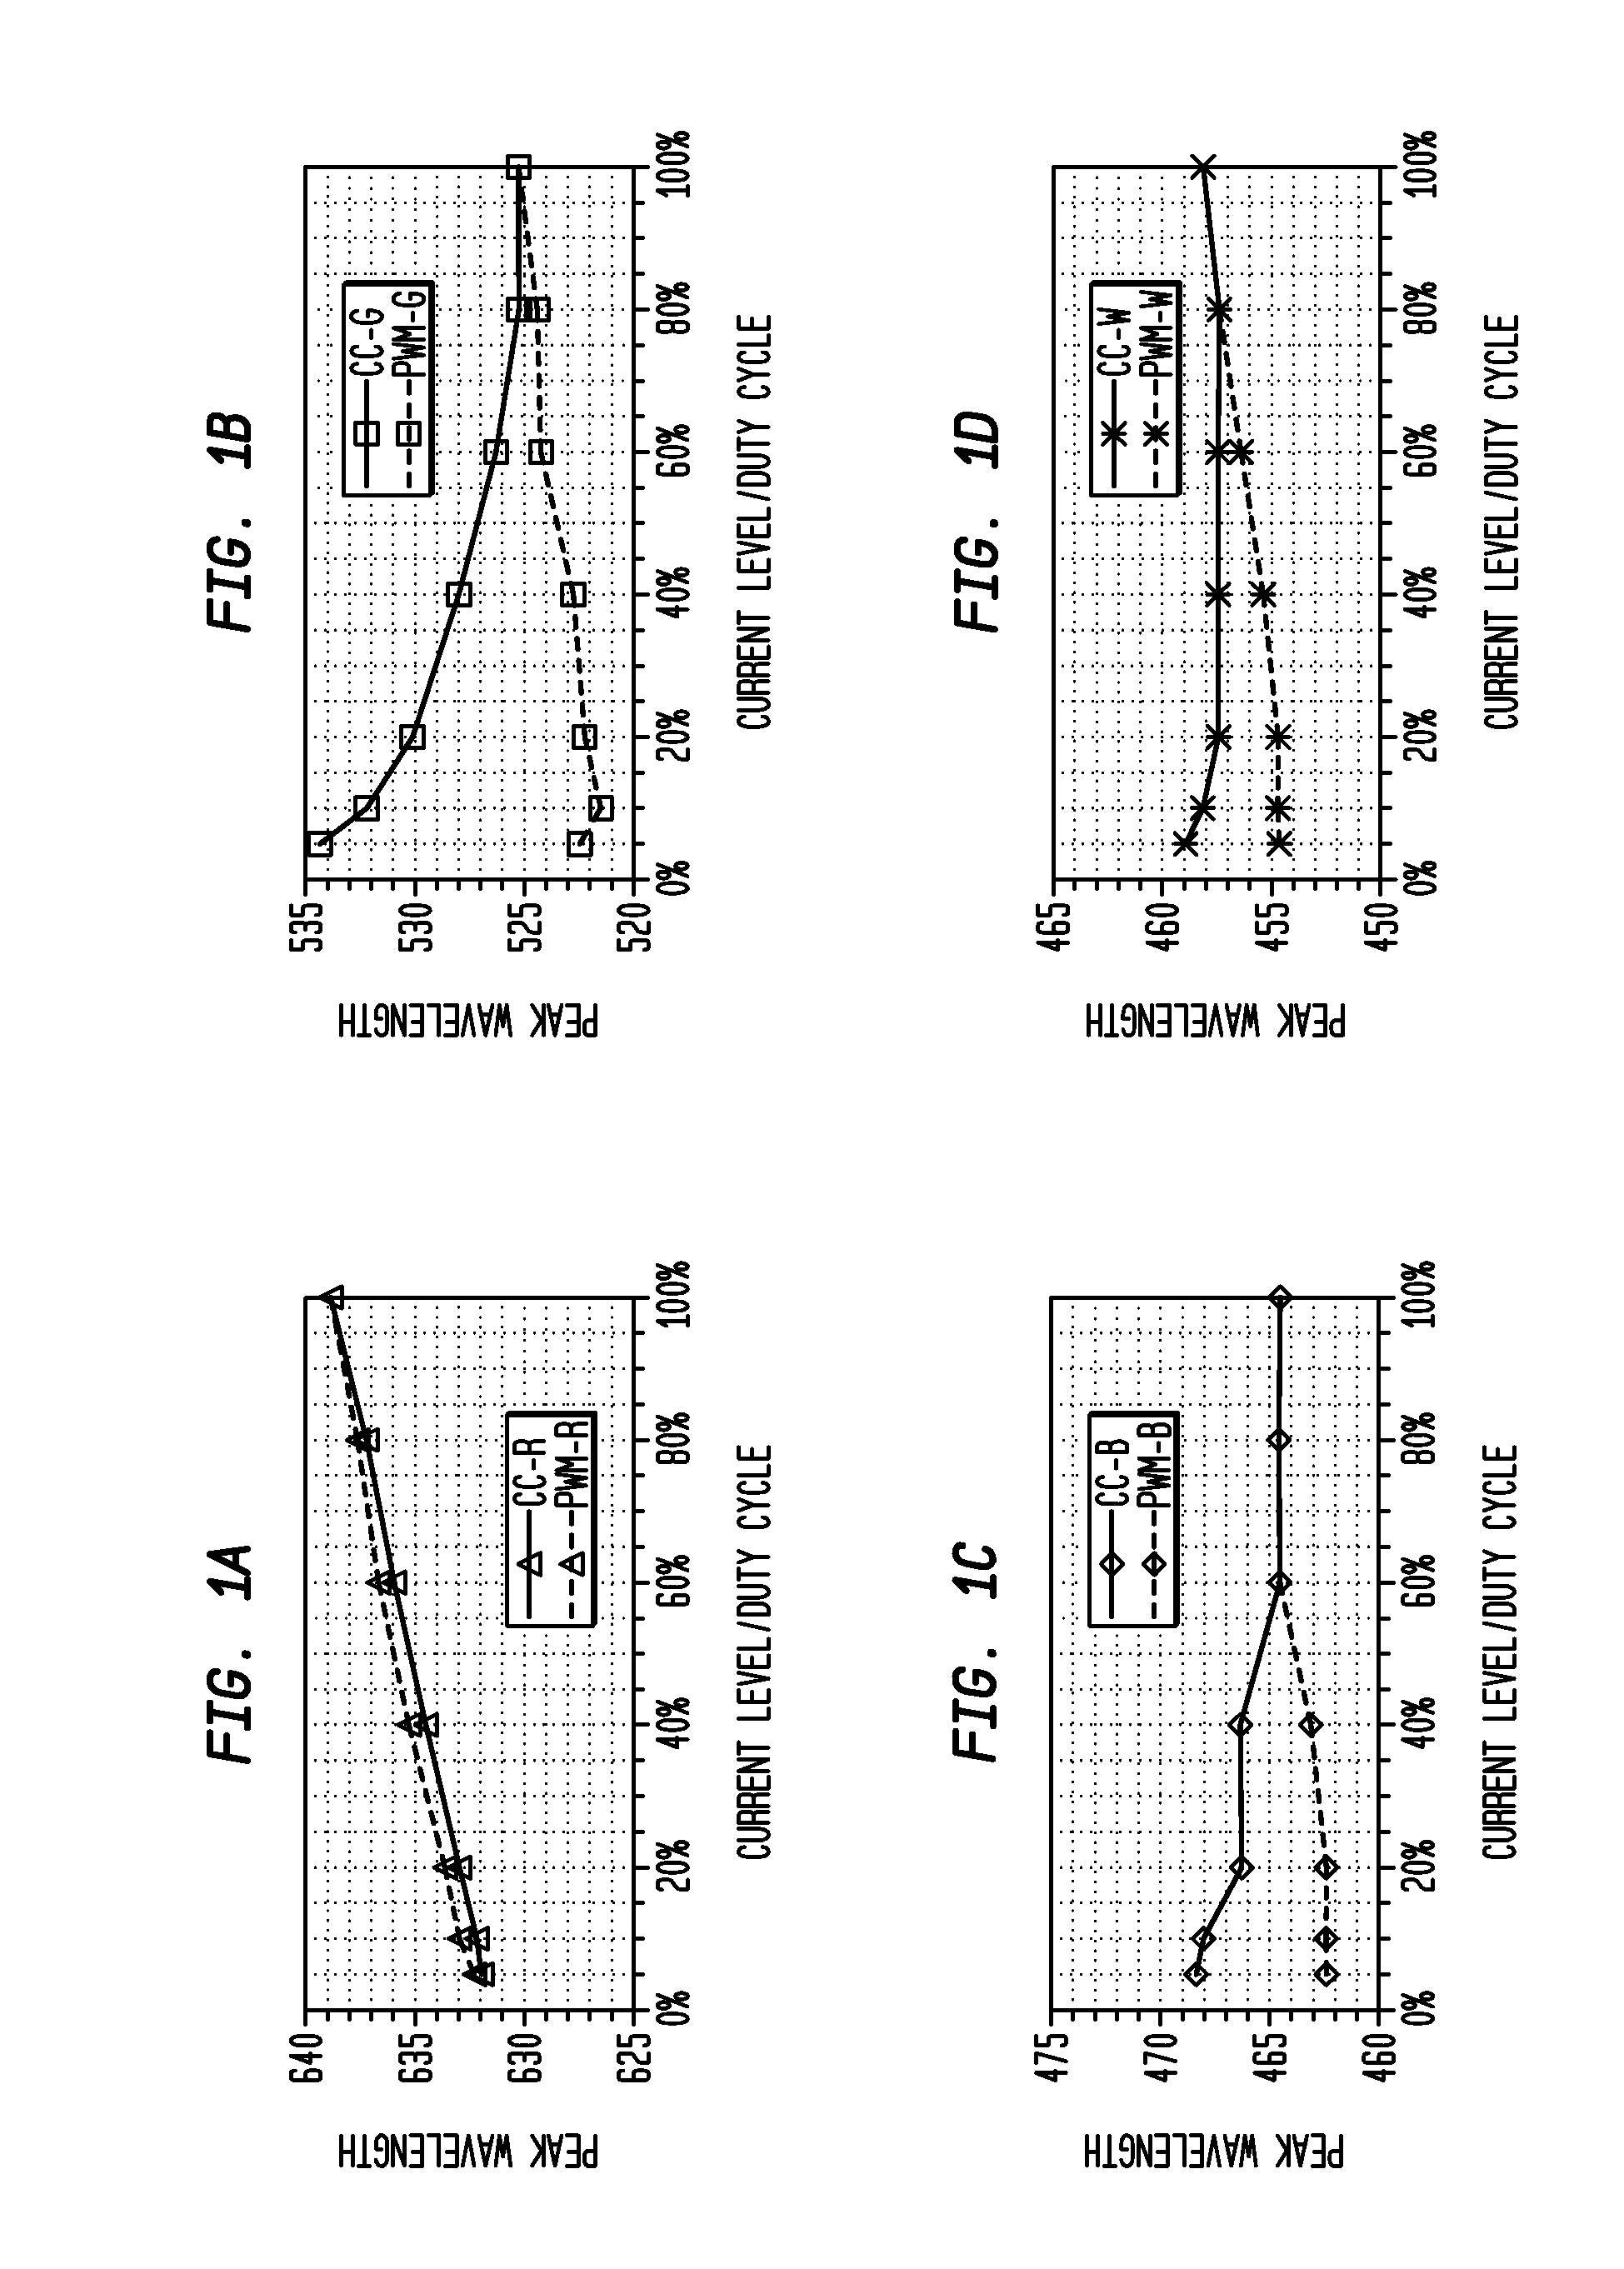 System and Method for Regulation of Solid State Lighting